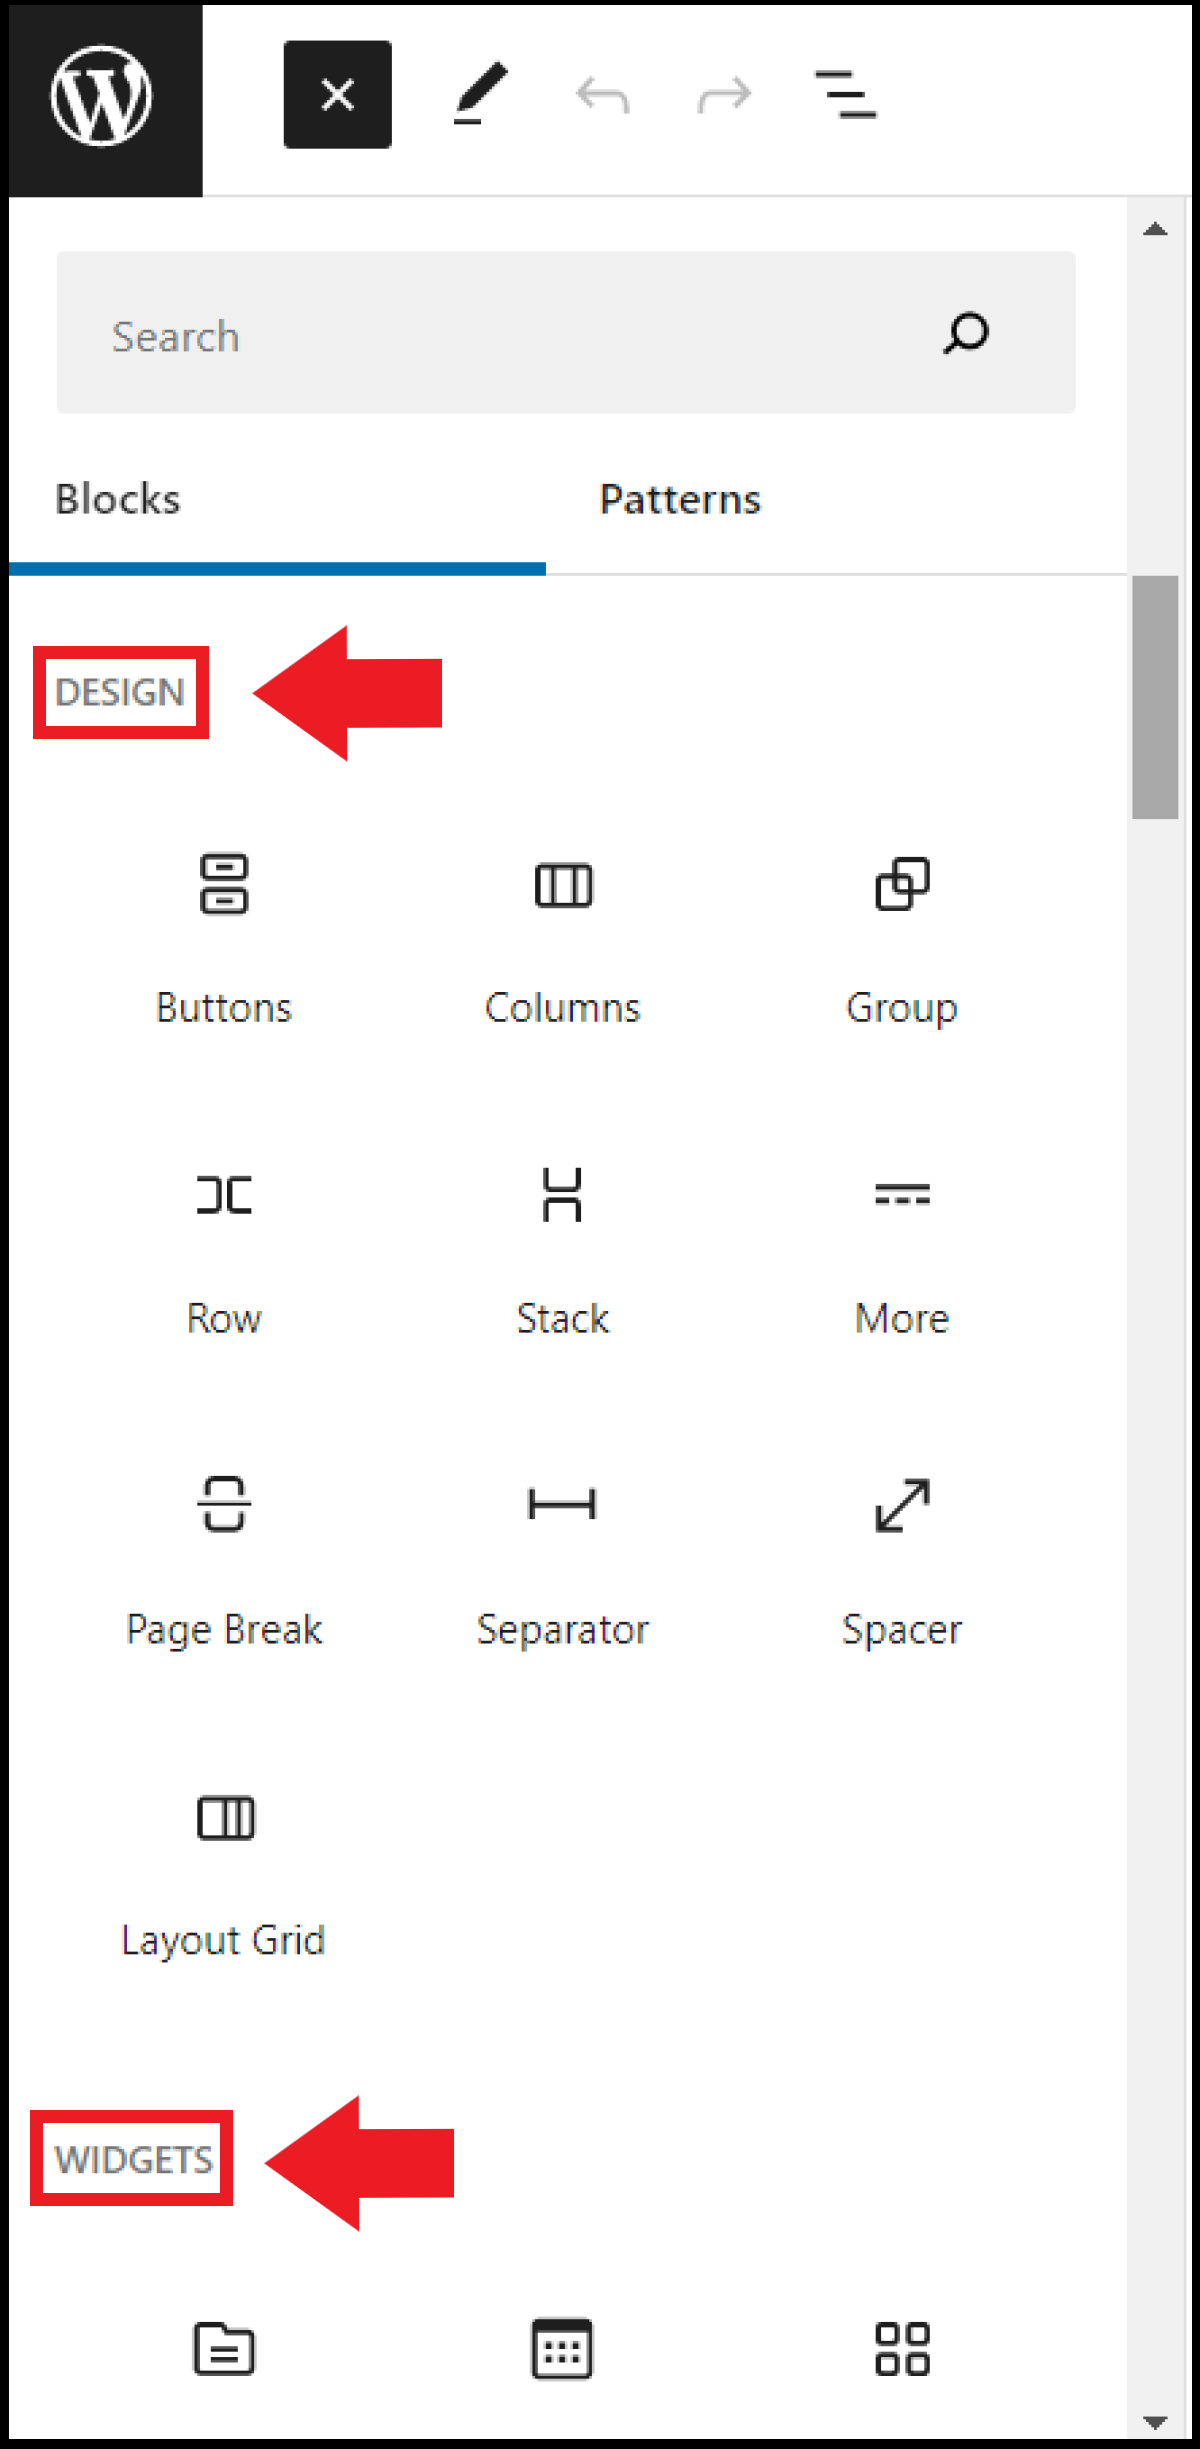 The ‘Design’ and ‘Widgets’ sections in the editor menu